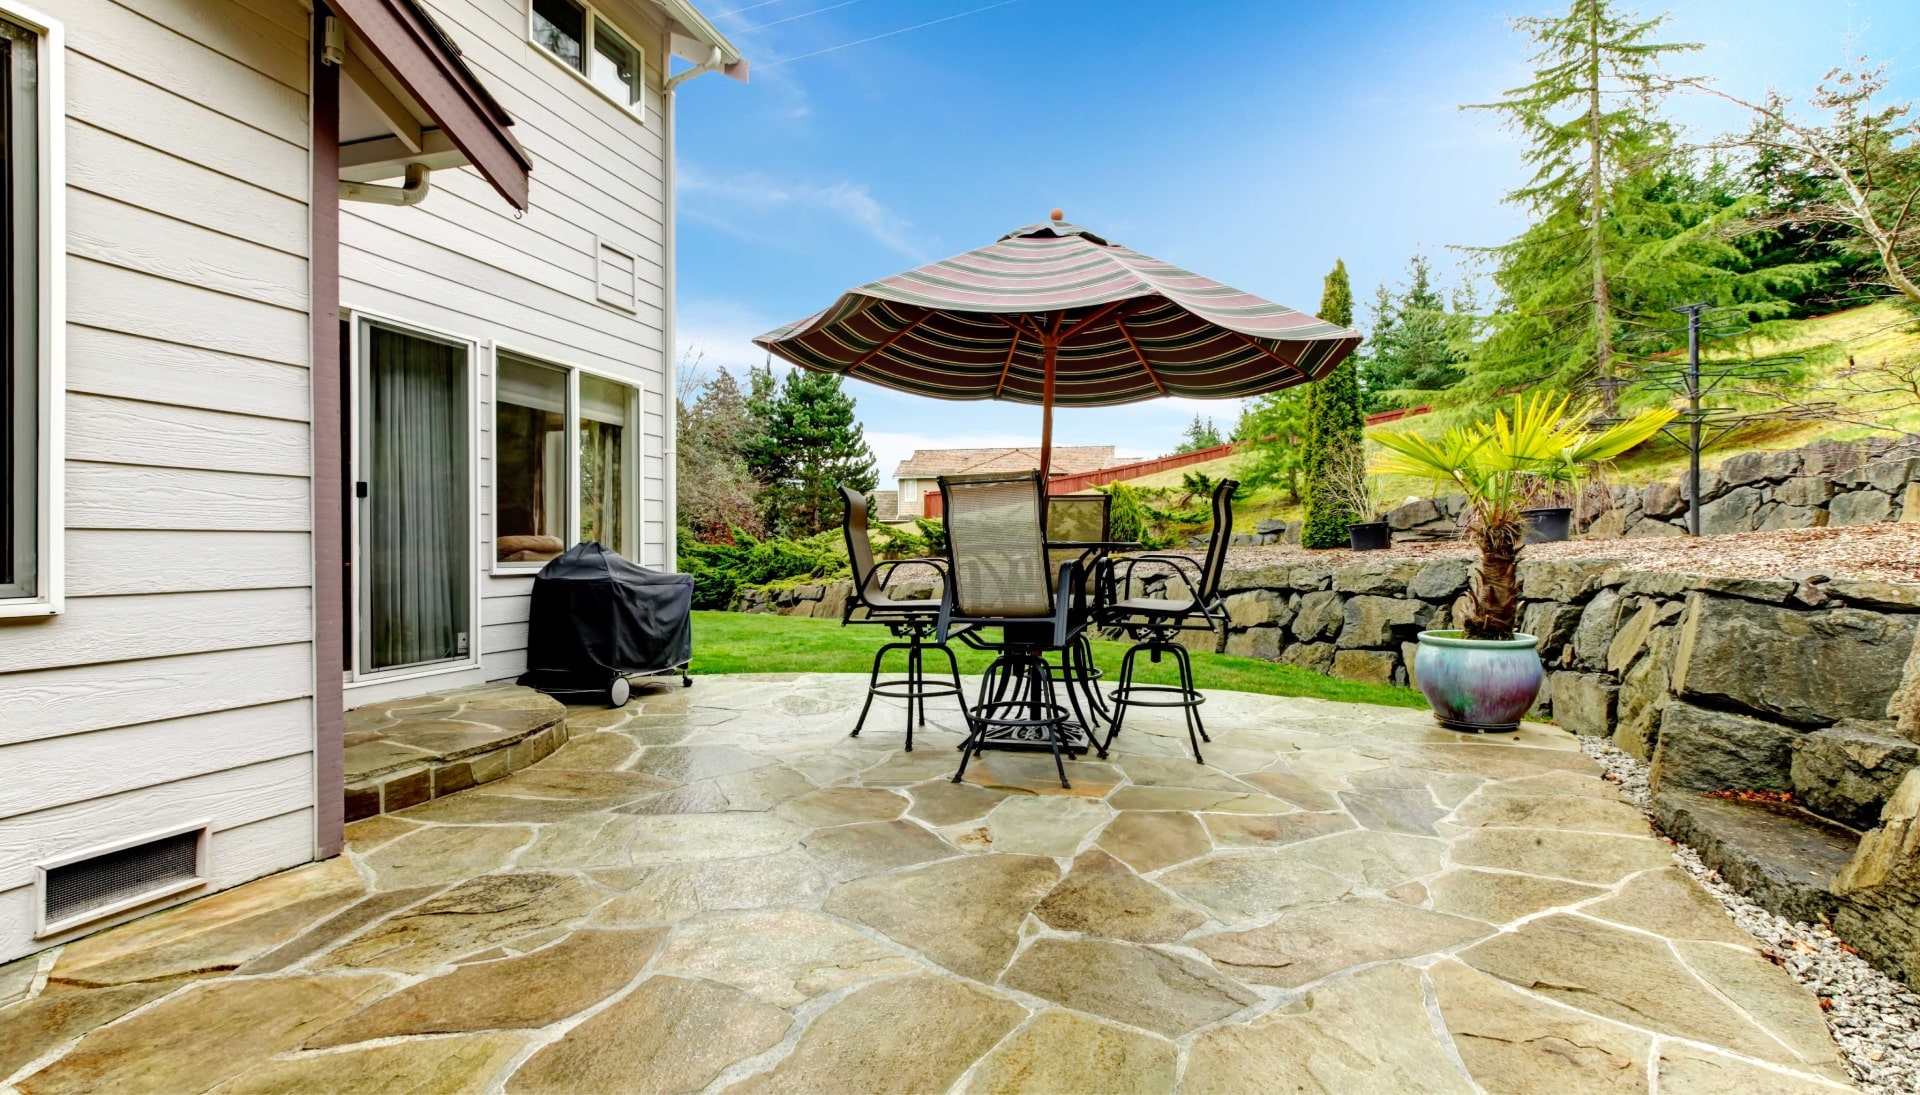 Create an Outdoor Oasis with Stunning Concrete Patio in Harrisburg, PA - Enjoy Beautifully Textured and Patterned Concrete Surfaces for Your Entertaining and Relaxation Needs.